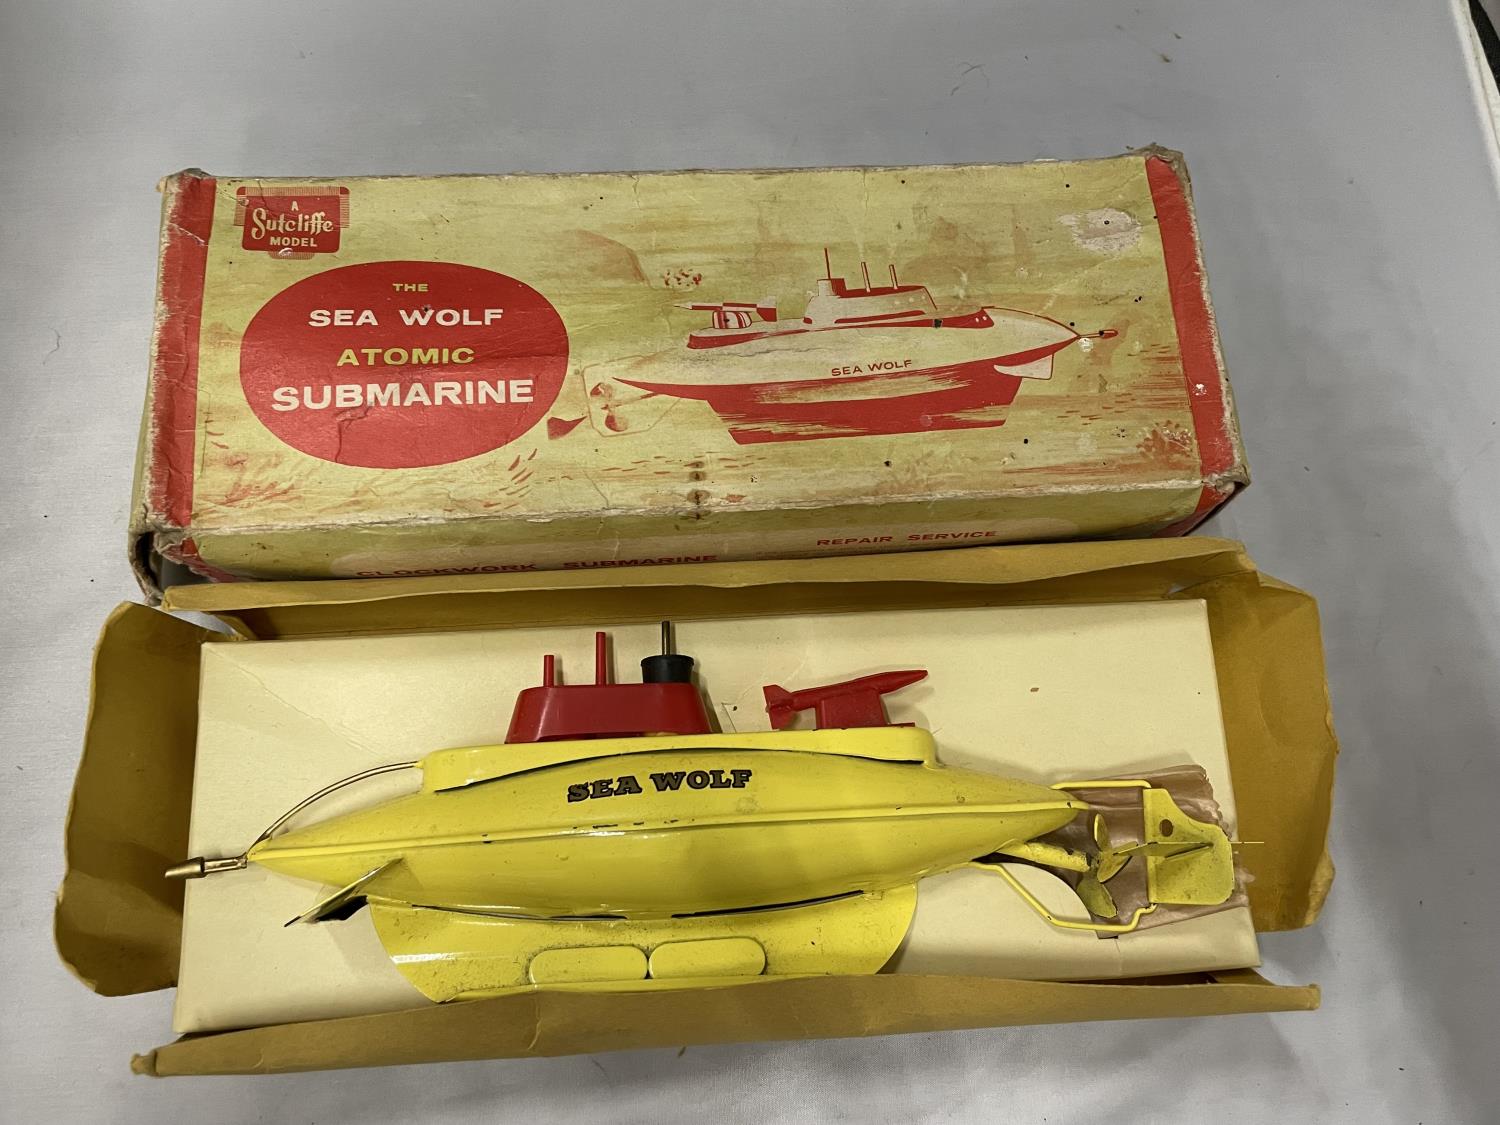 A BOXED SUTTCLIFFE MODEL OF THE SEA WOLF ATOMIC SUBMARINE